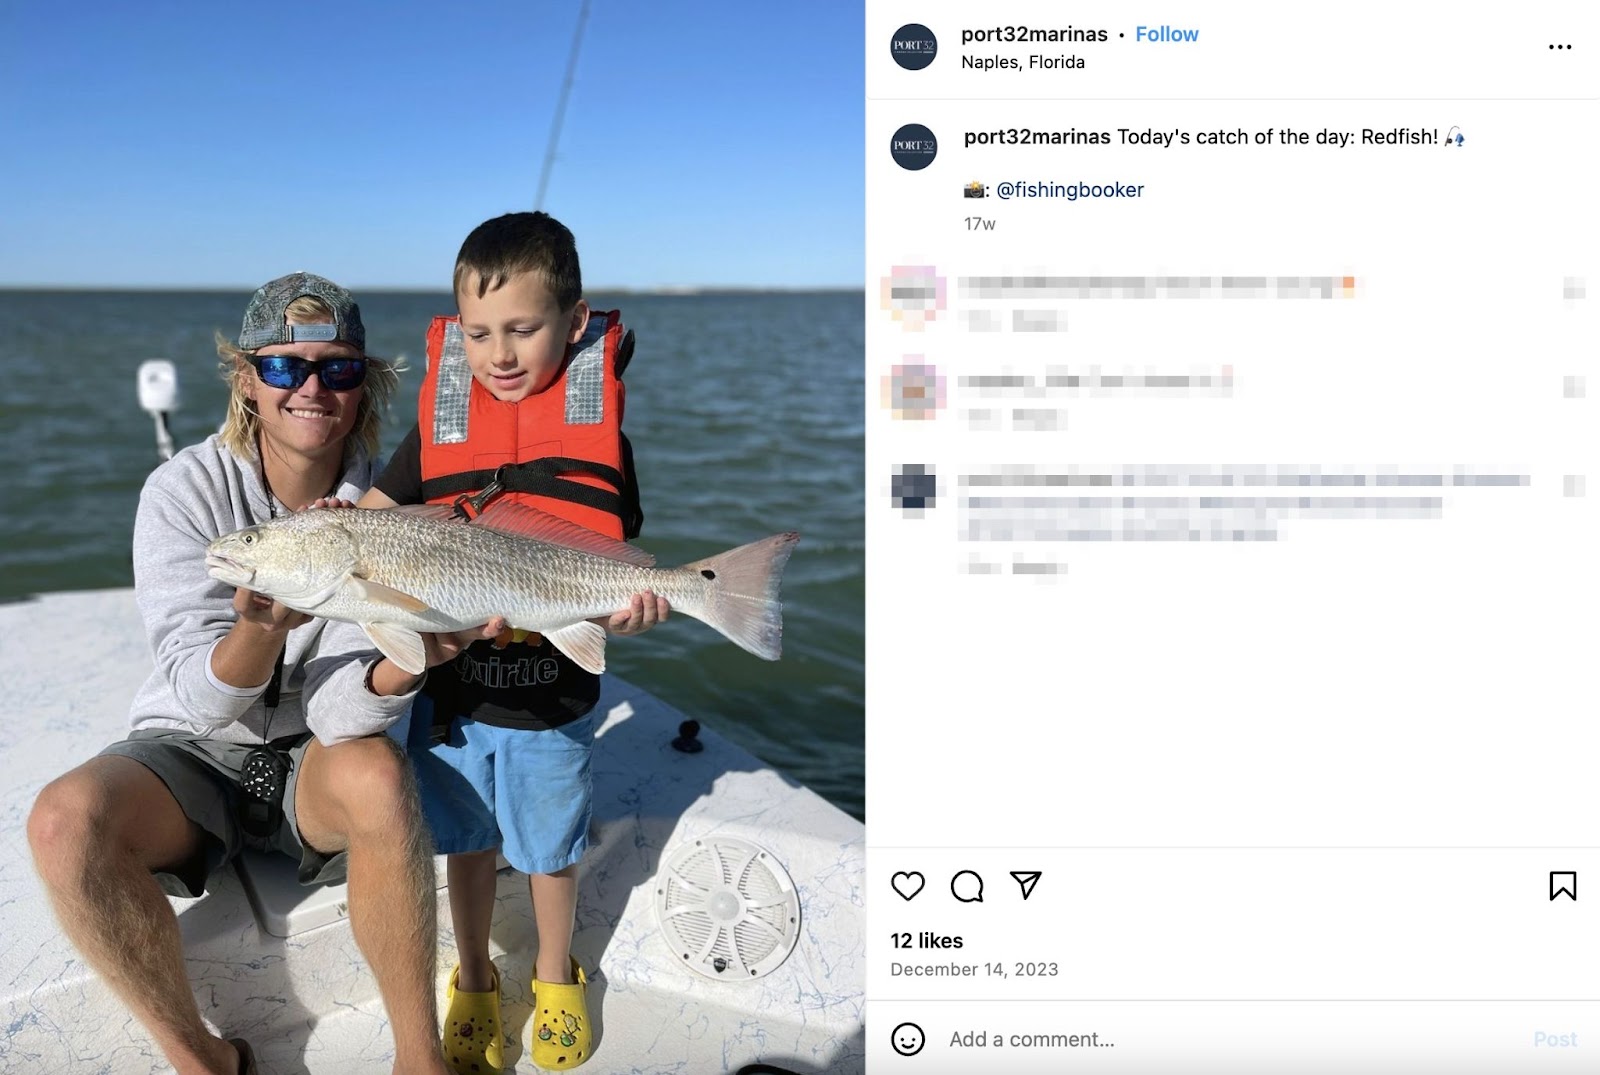 person and child holding a large fish with the instagram caption "Today's catch of the day: Redfish!"